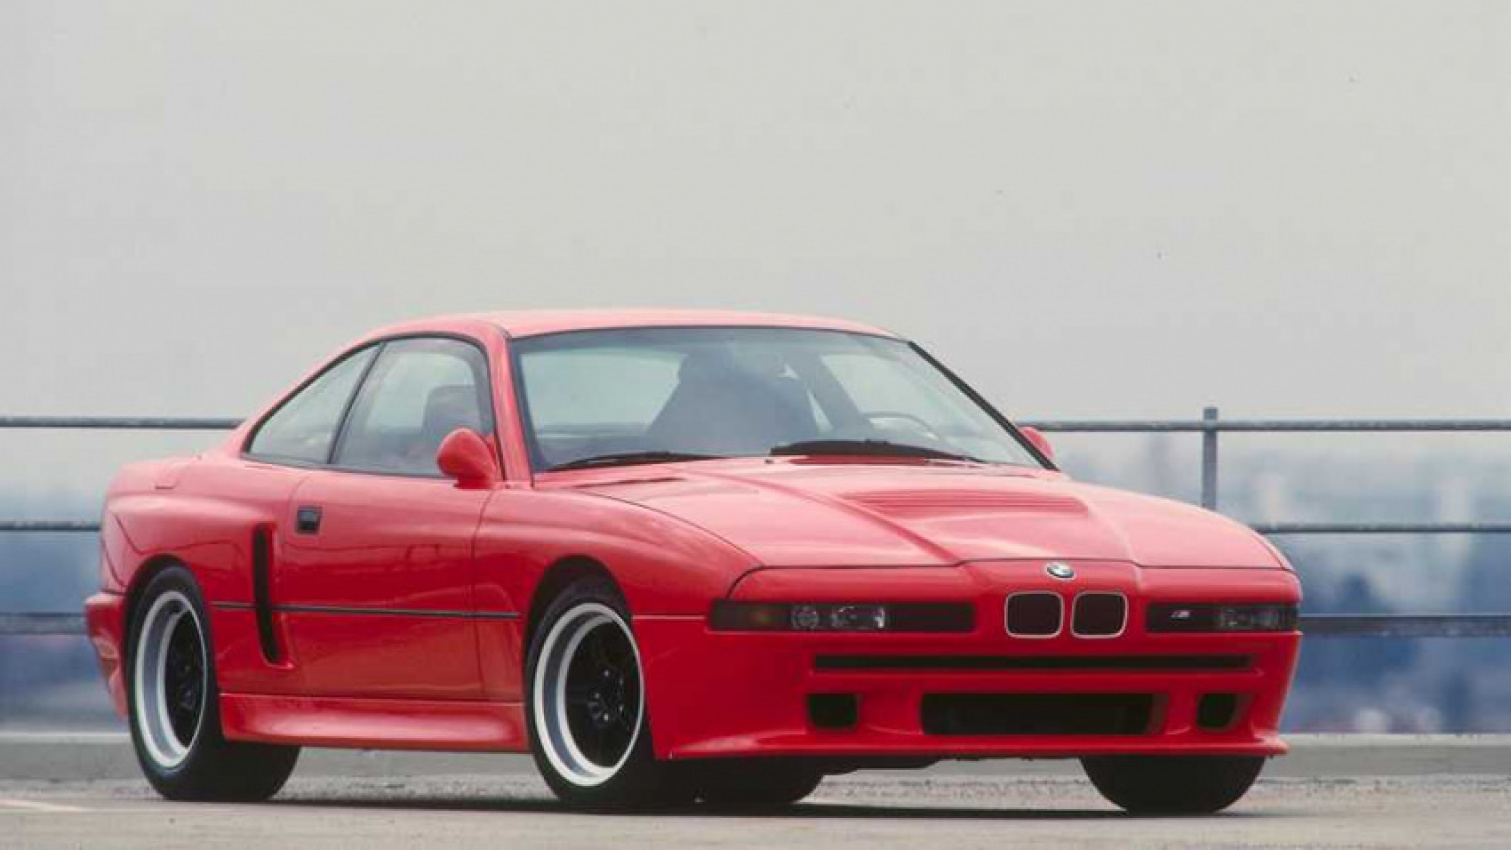 autos, bmw, cars, one-off bmw m8 e31 prototype makes rear video appearance with its v12